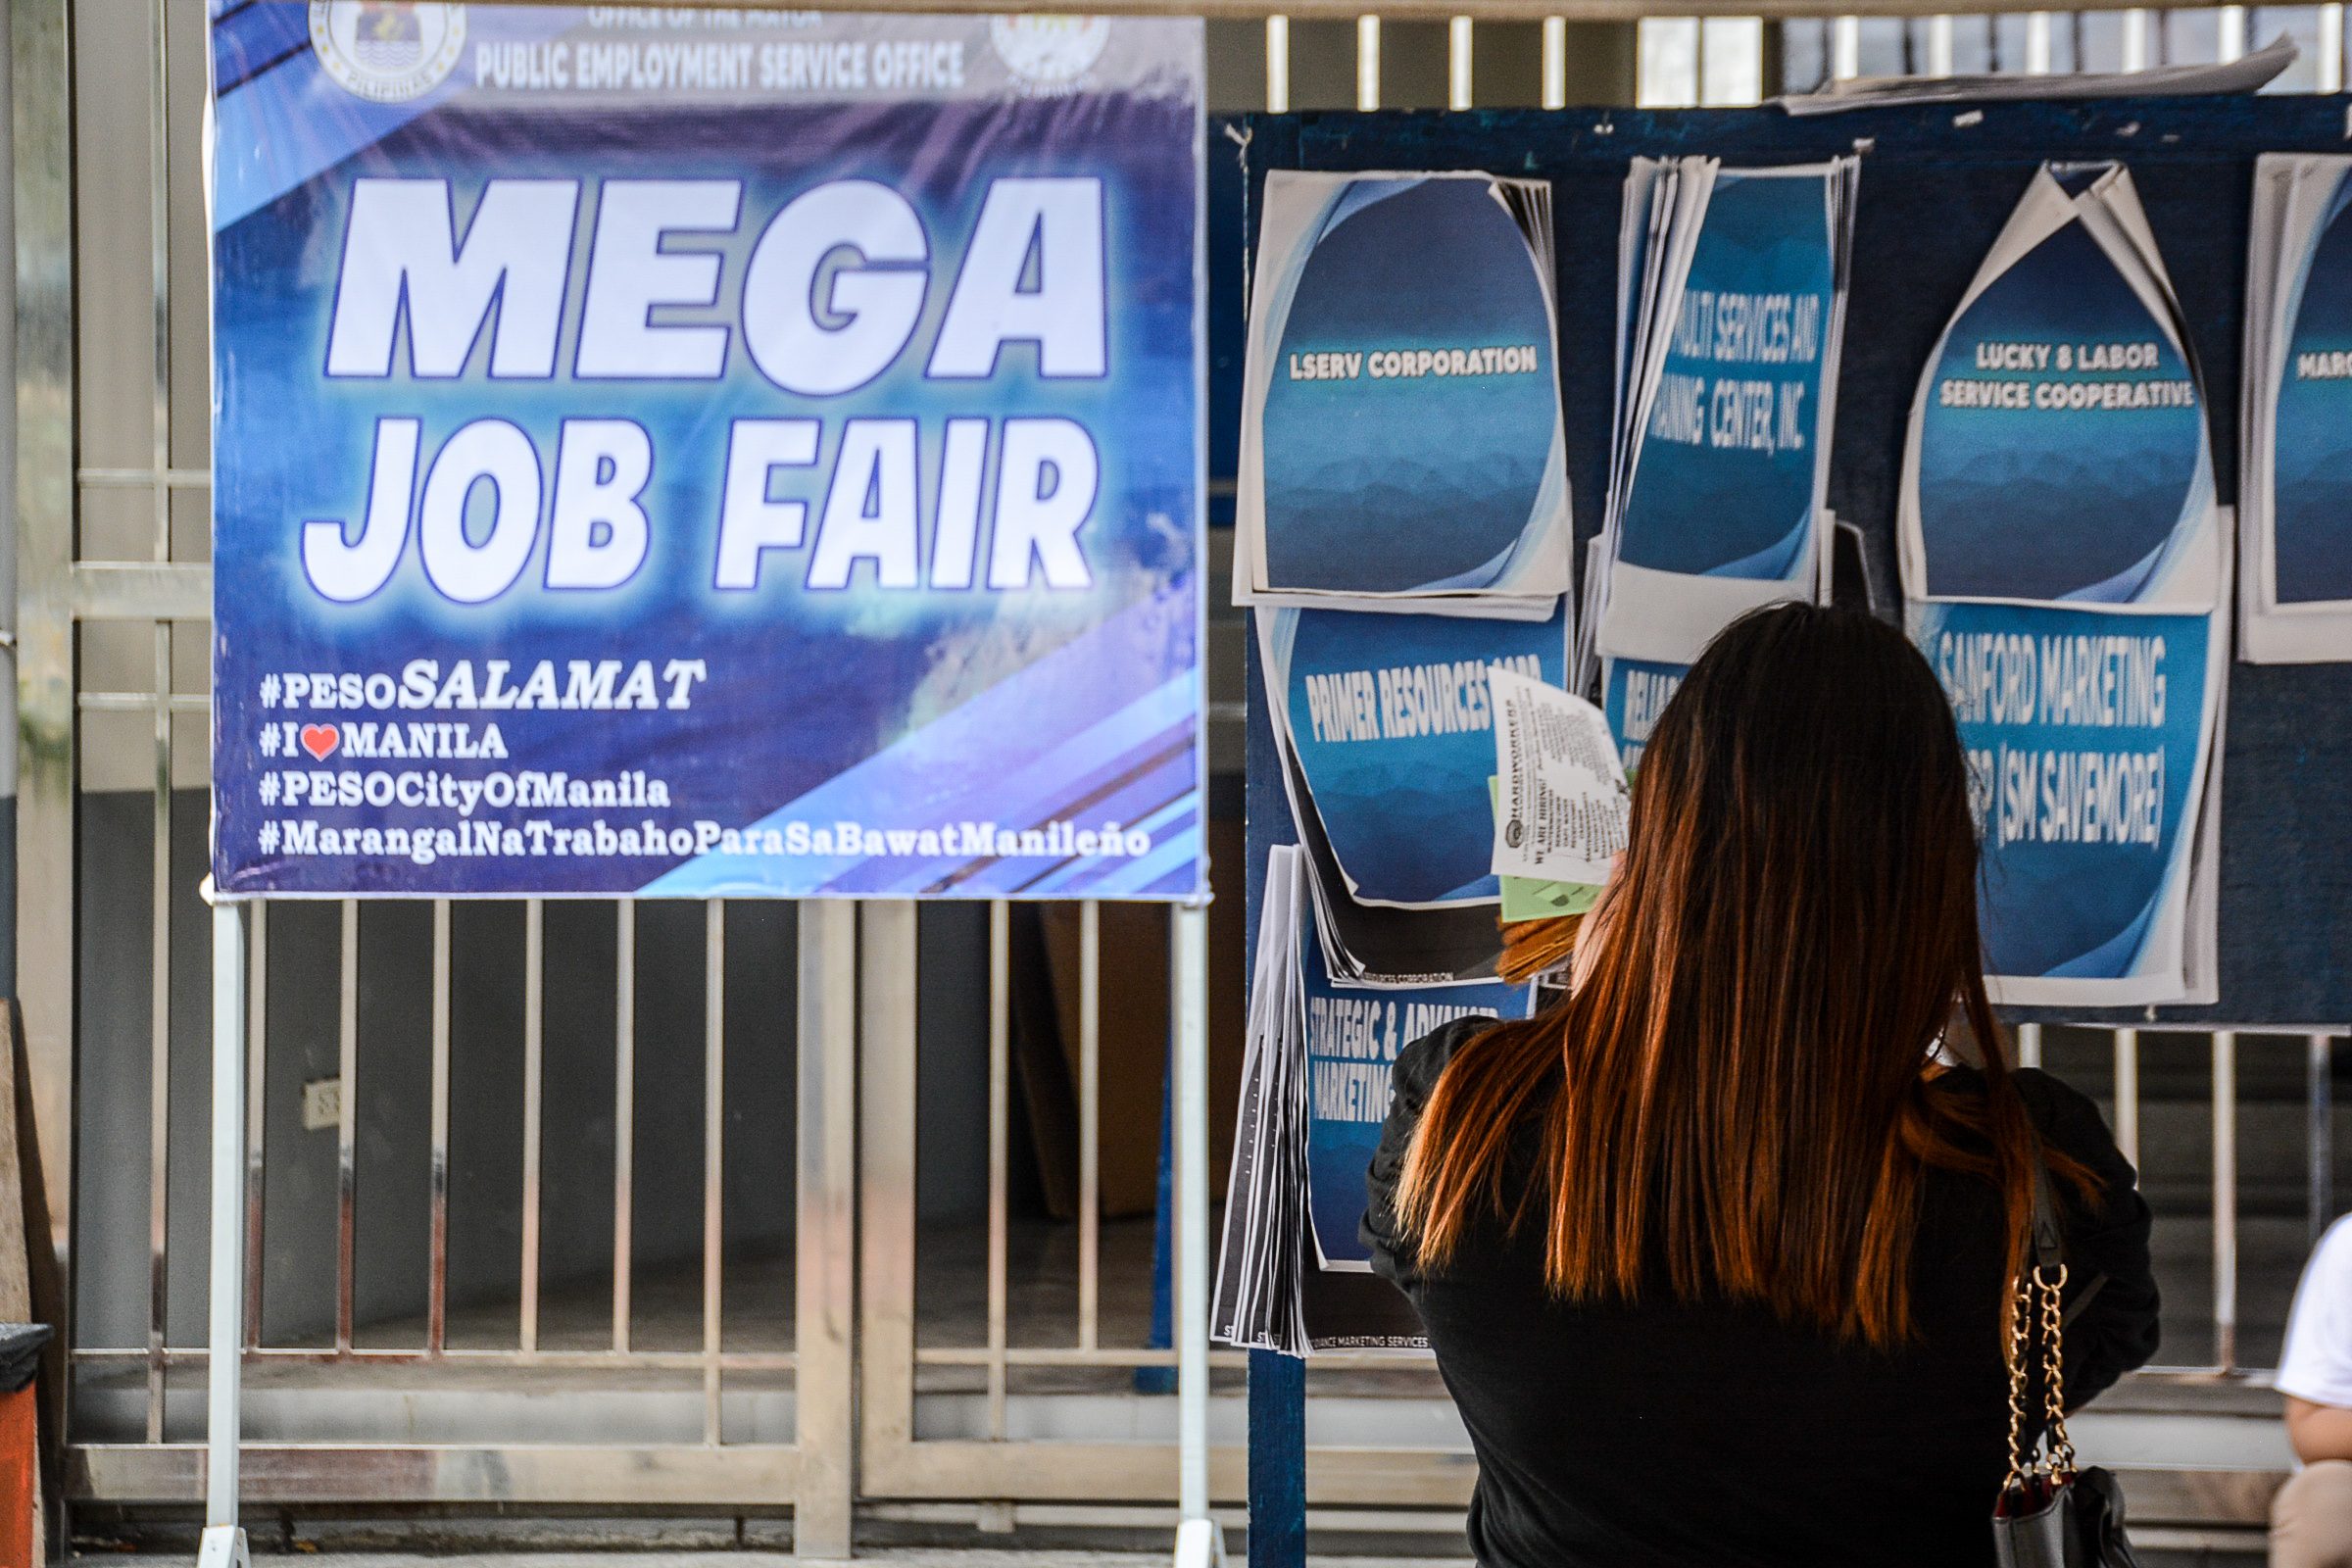 About 7 of 10 Filipinos having difficulty finding a job nowadays – SWS